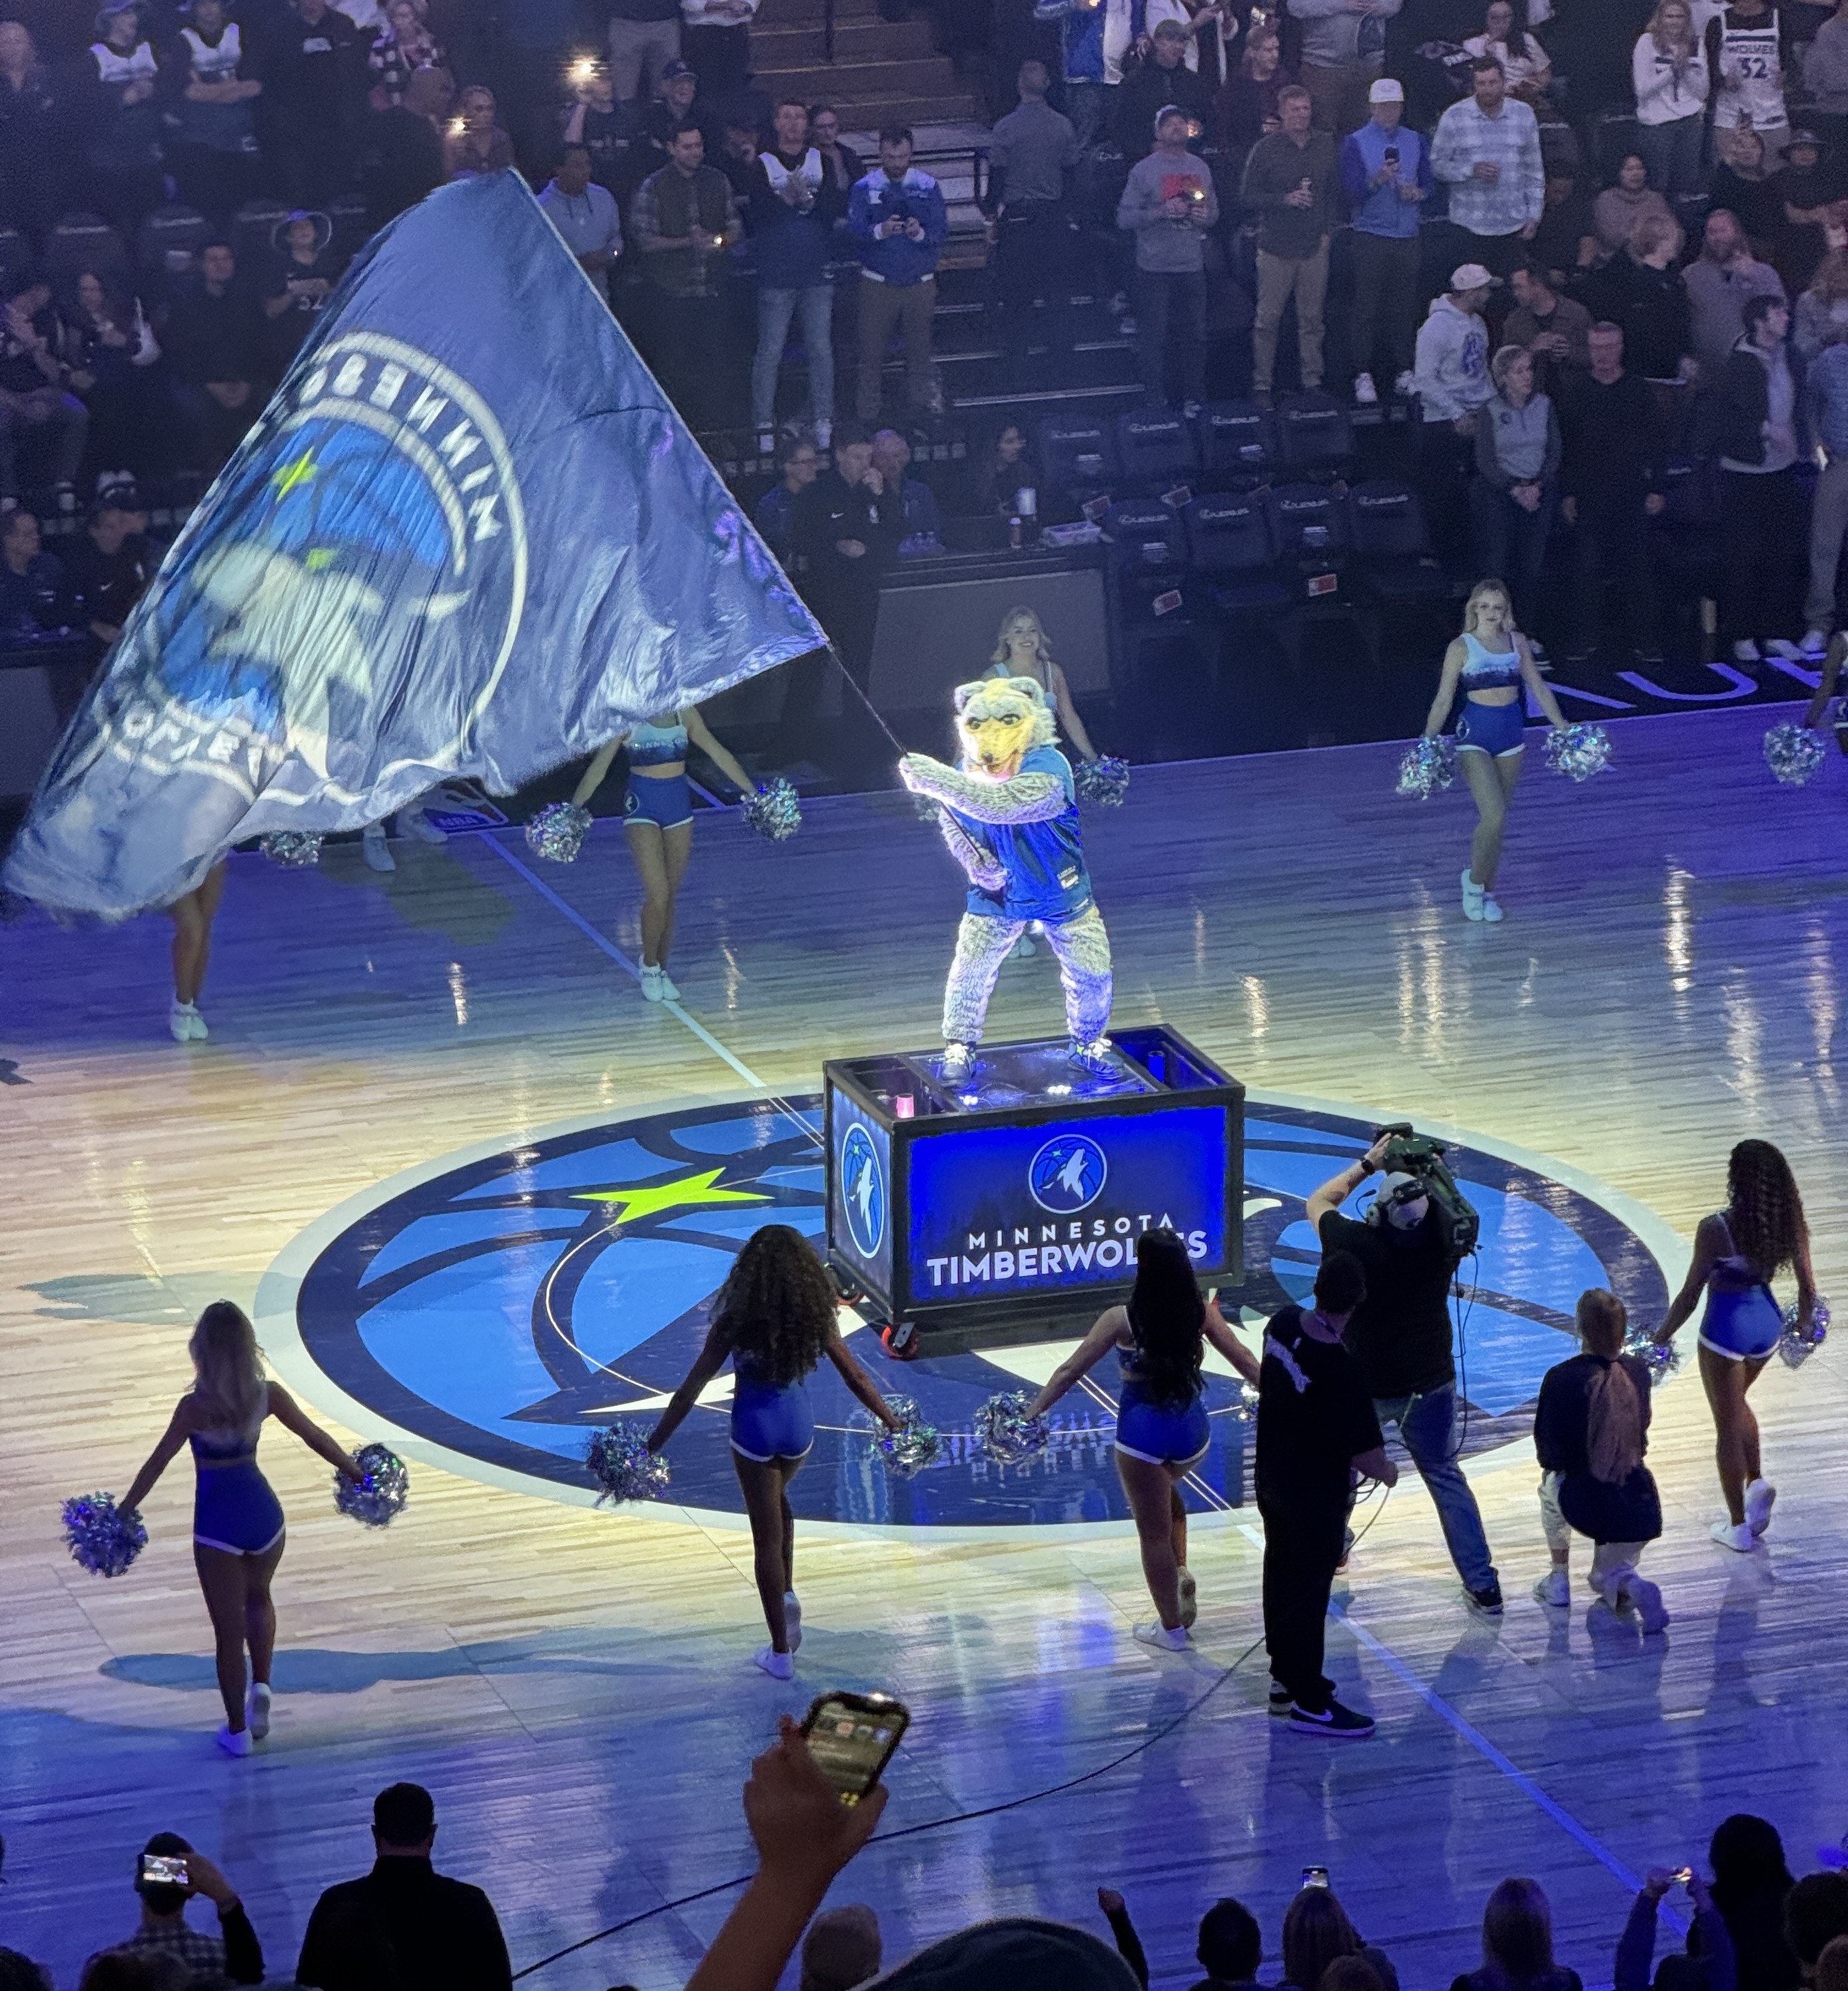 Timberwolves mascot Crunch waving a giant flag at center court, surrounded by cheerleaders 